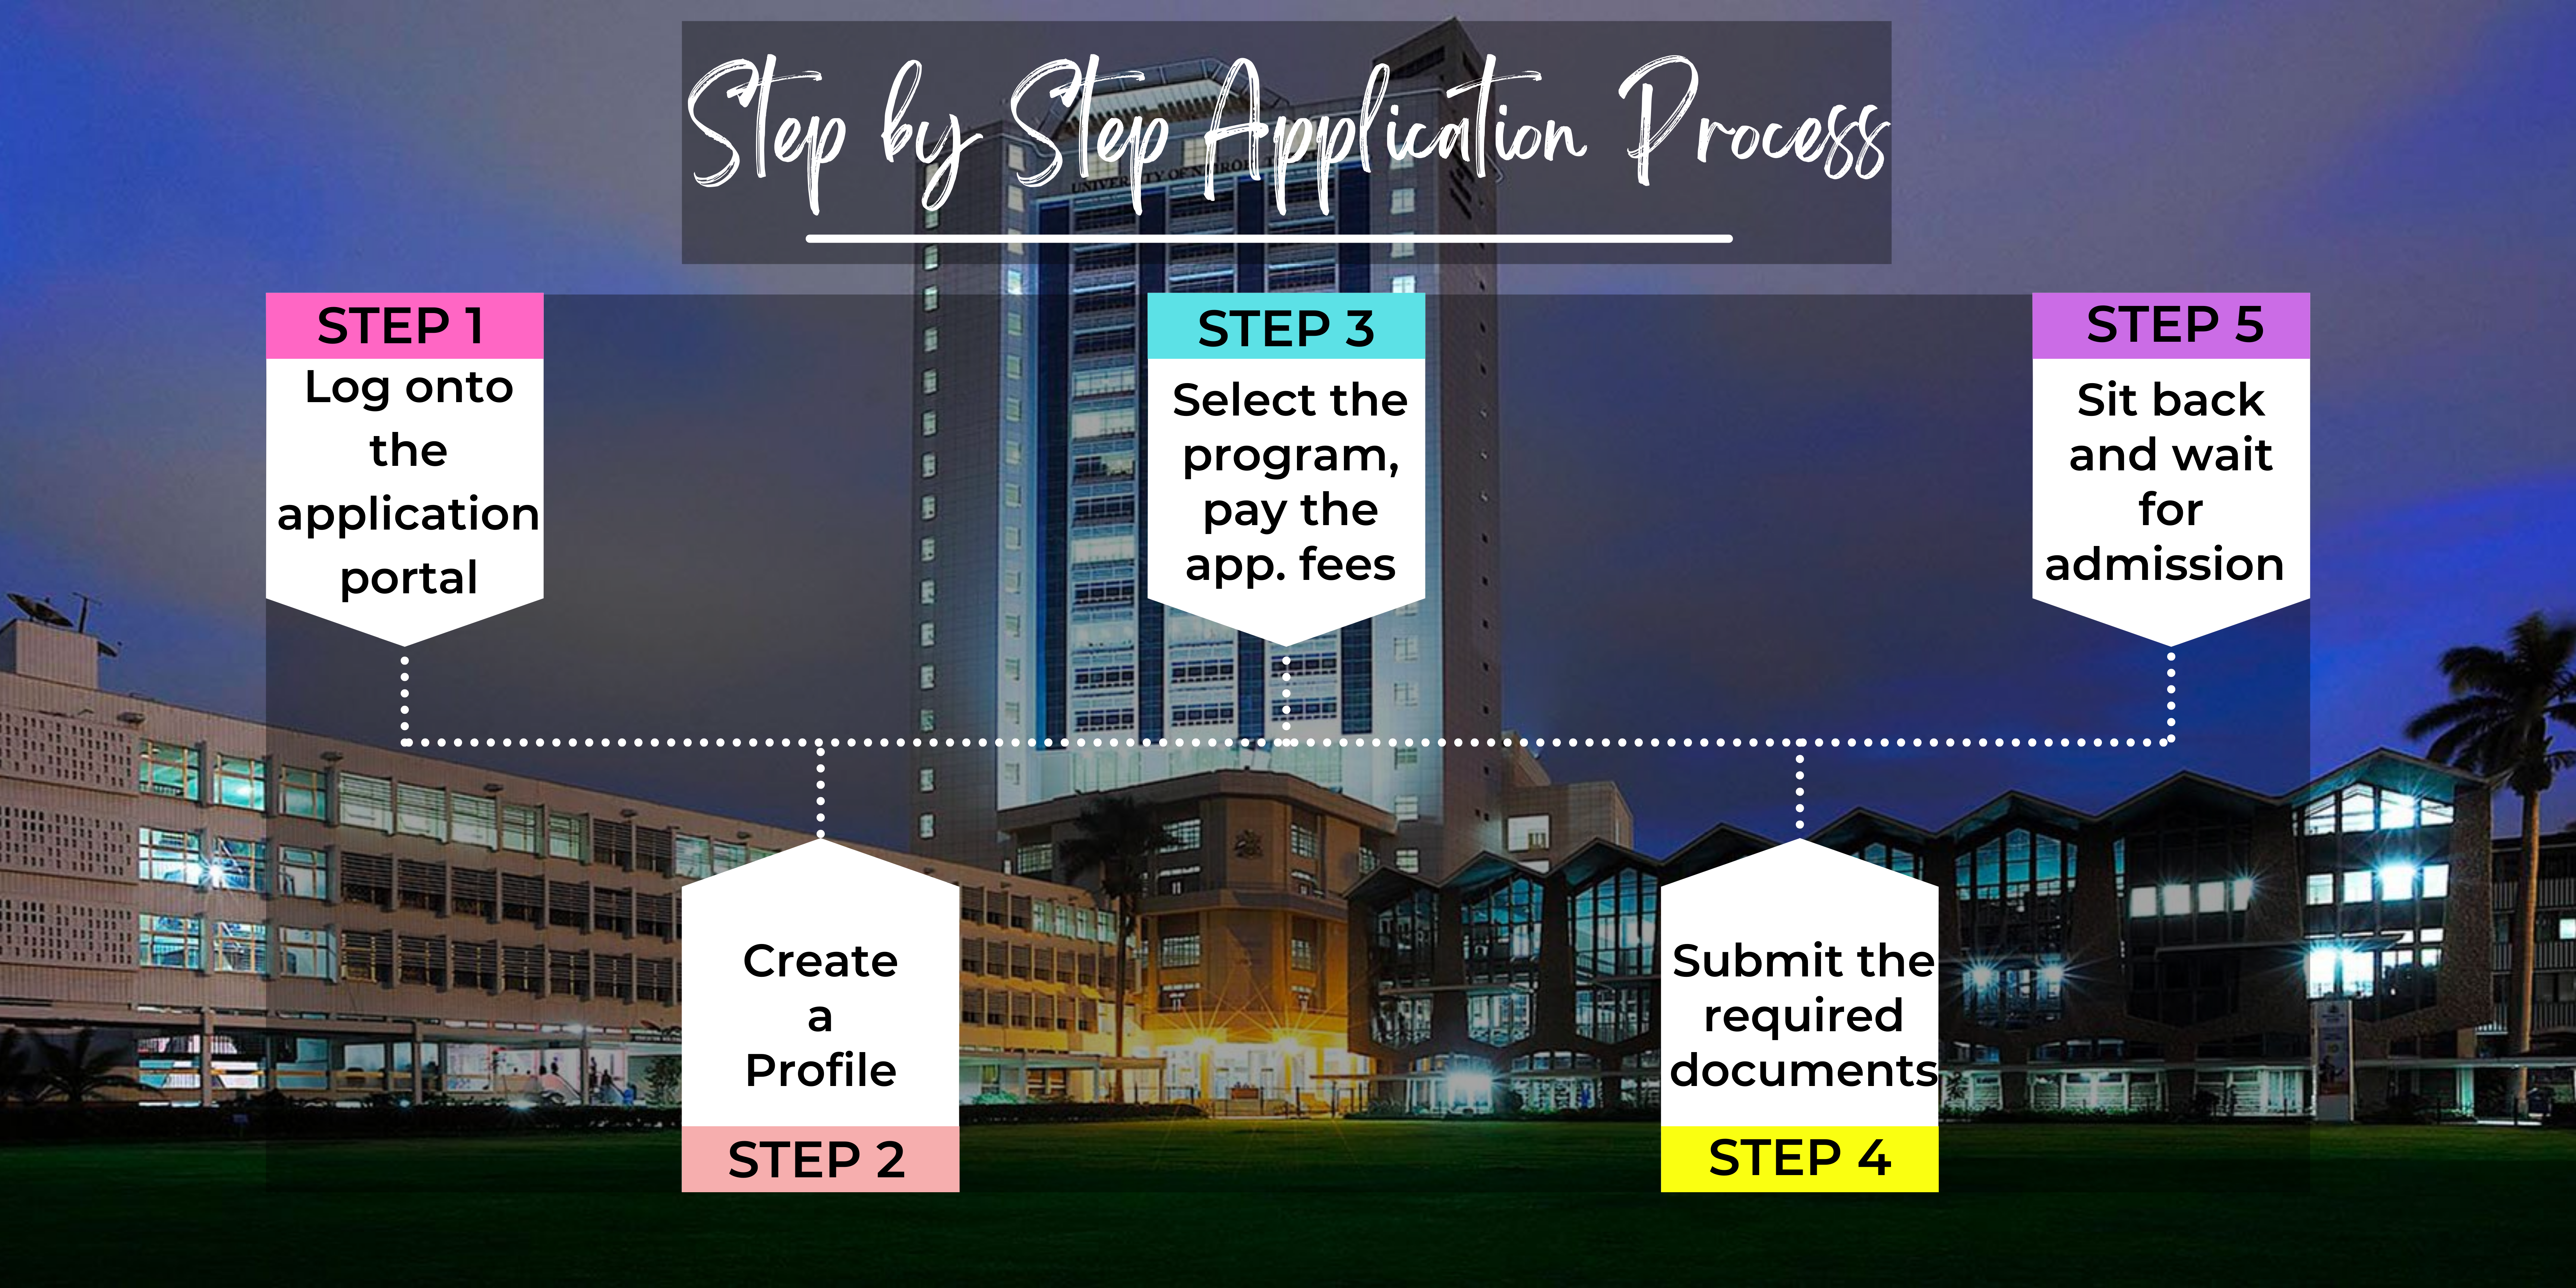 Step by Step Application Process 